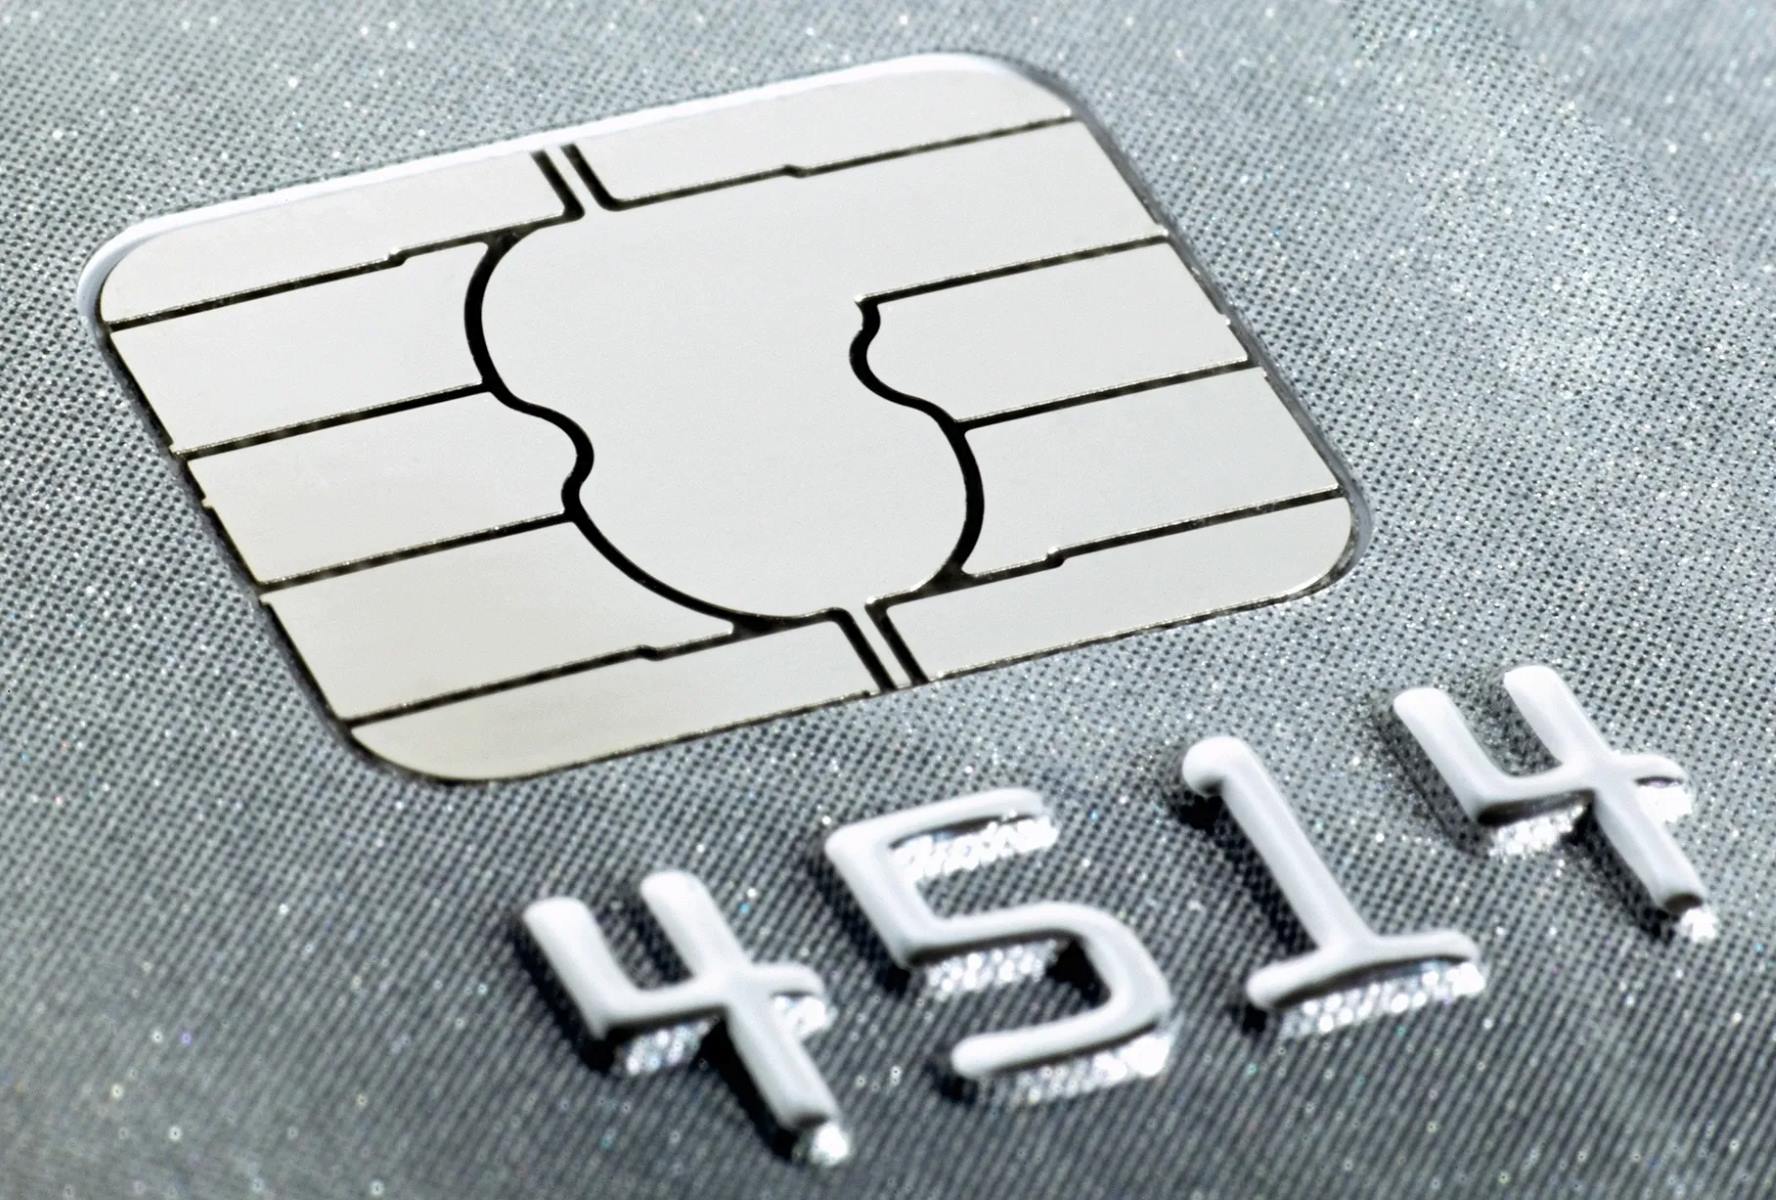 How To Bypass Credit Card Verification